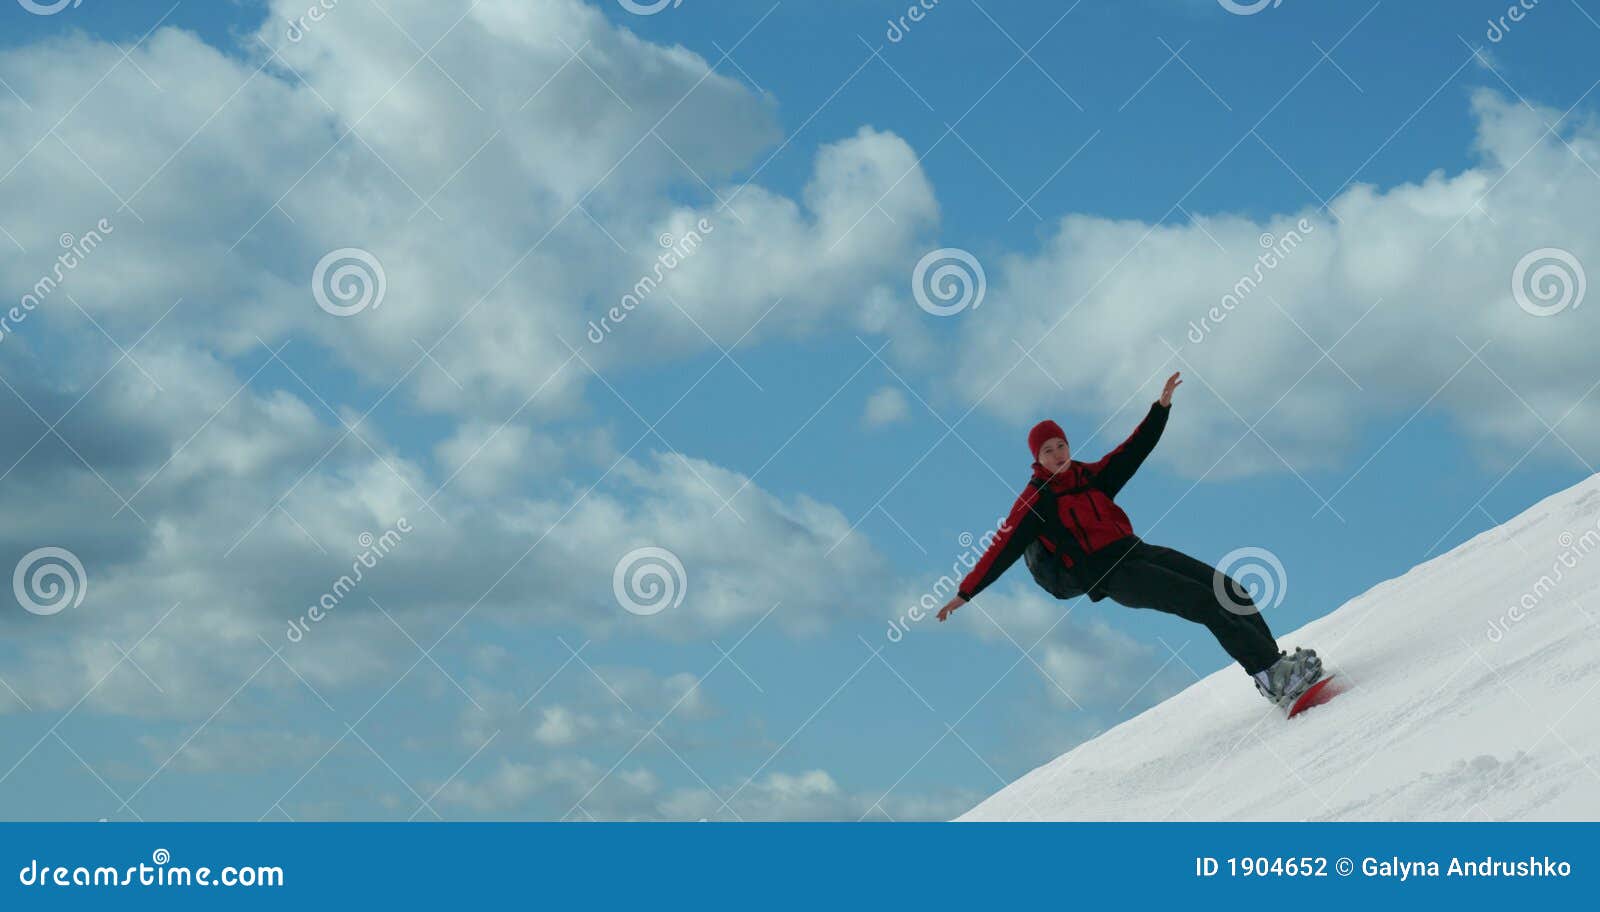 Snowboarder flying stock photo. Image of competition, powder - 1904652